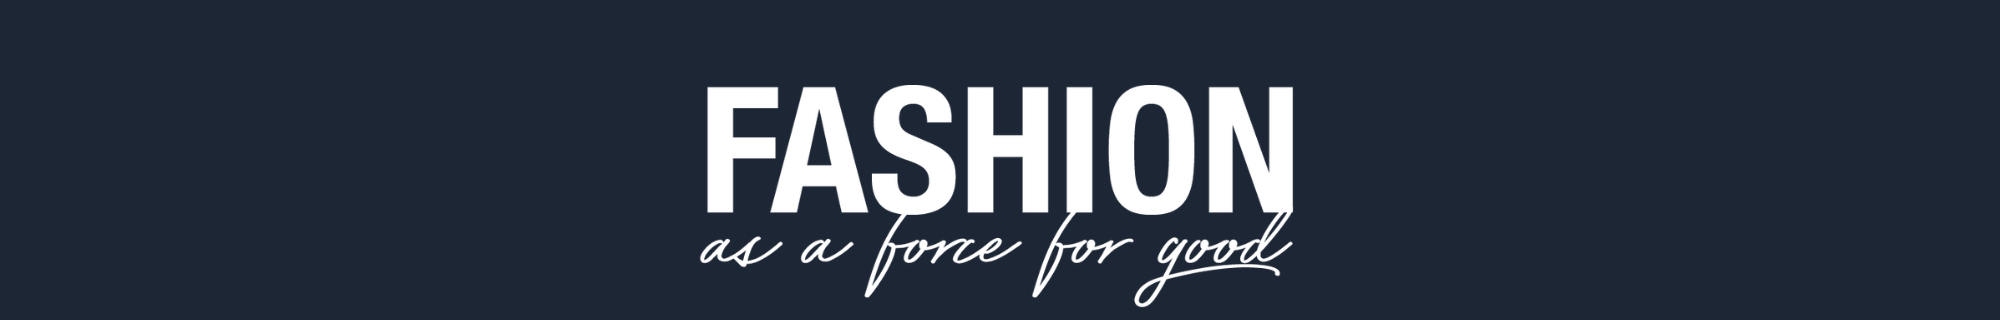 Fashion as a Force for Good Ball - Award Nominations